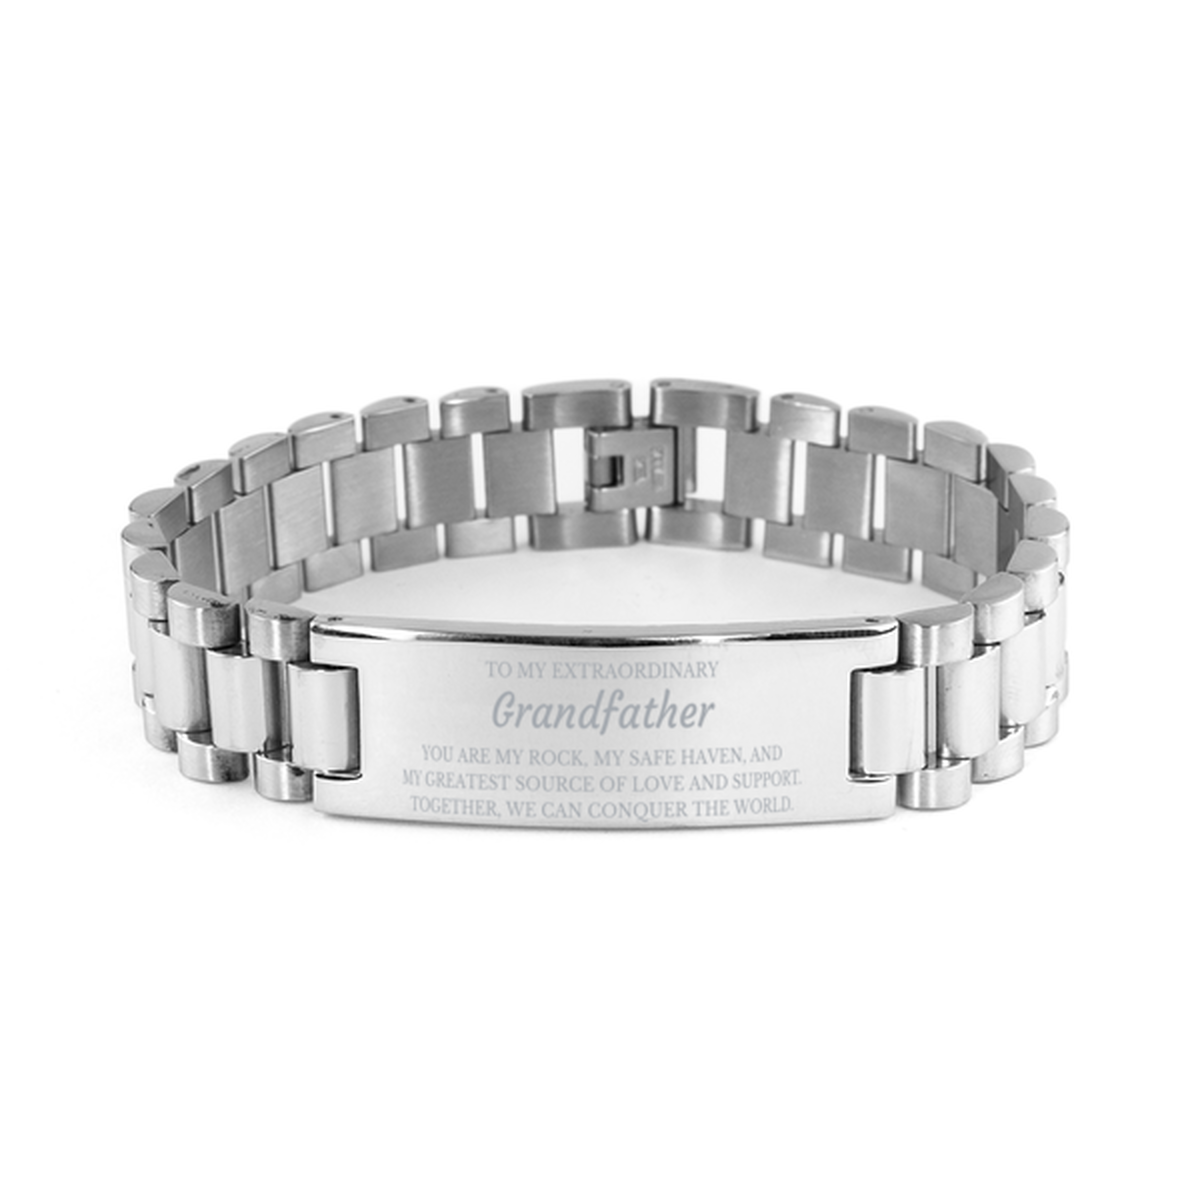 To My Extraordinary Grandfather Gifts, Together, we can conquer the world, Birthday Ladder Stainless Steel Bracelet For Grandfather, Christmas Gifts For Grandfather